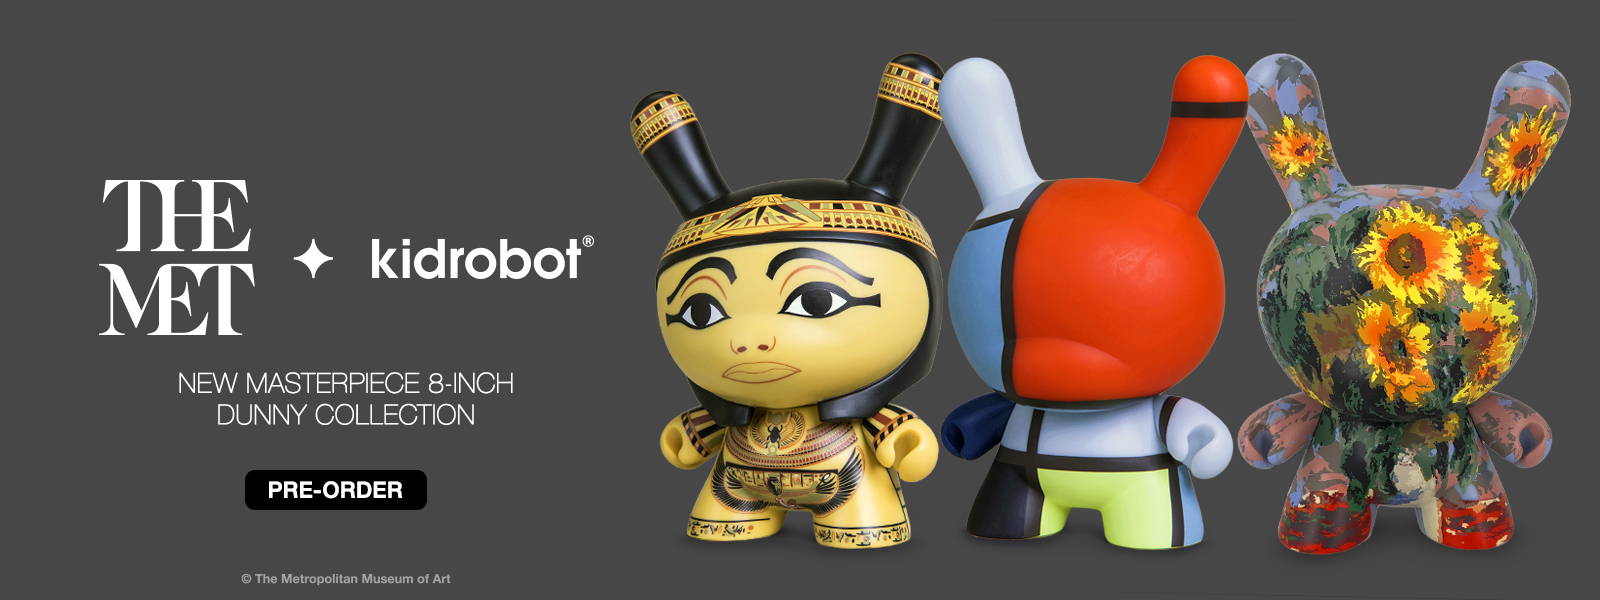 Kidrobot x The Met 8-inch Dunny Collection